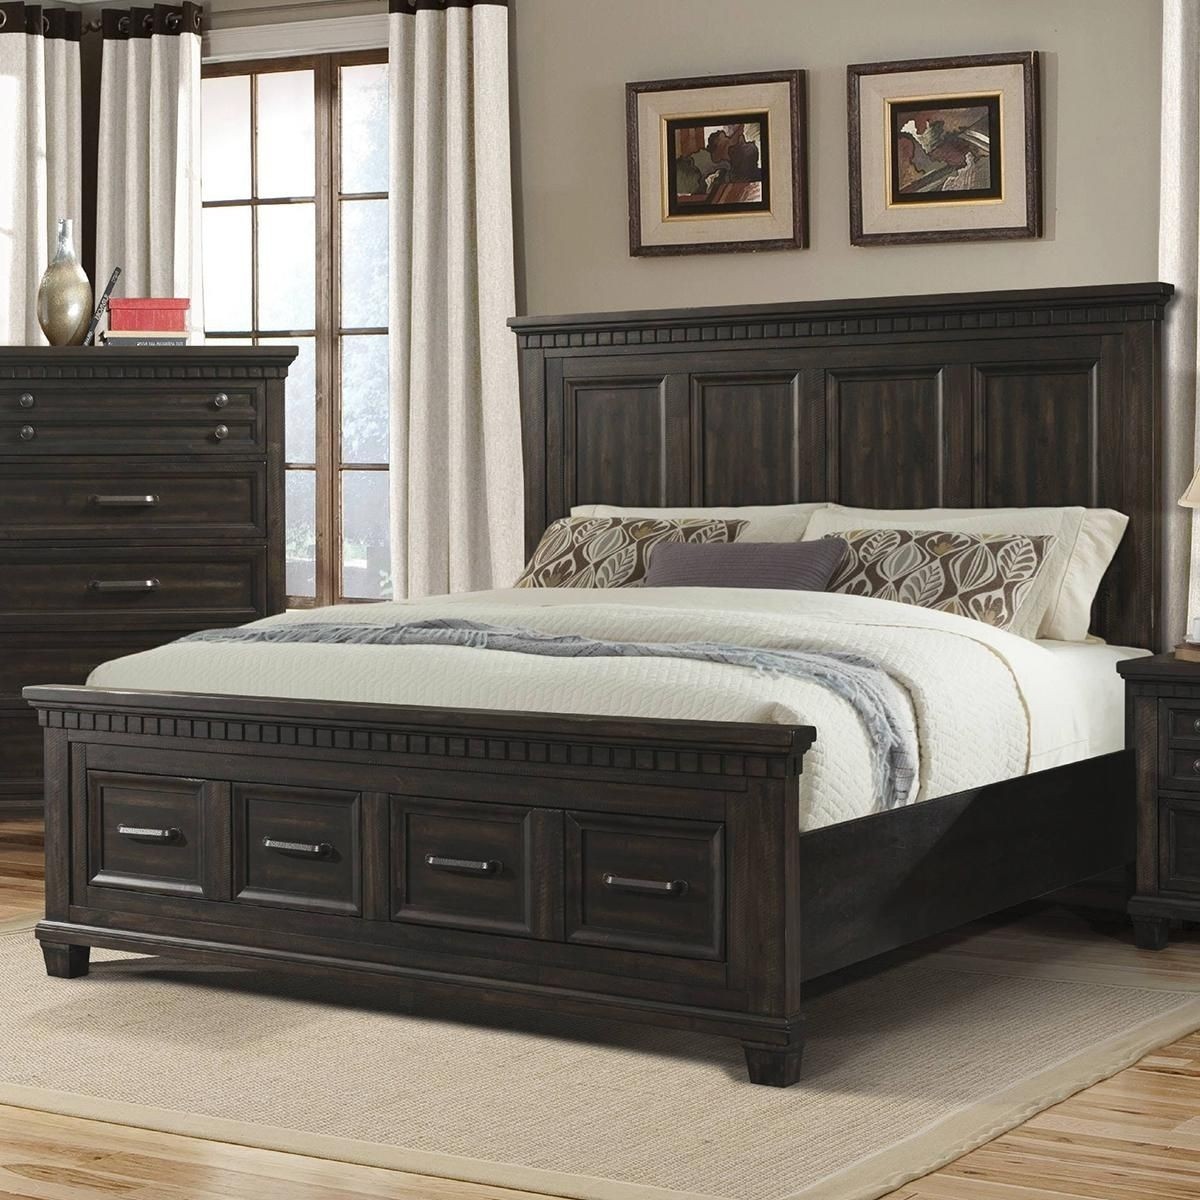 Mayberry hill mccabe 4 piece king bedroom set in